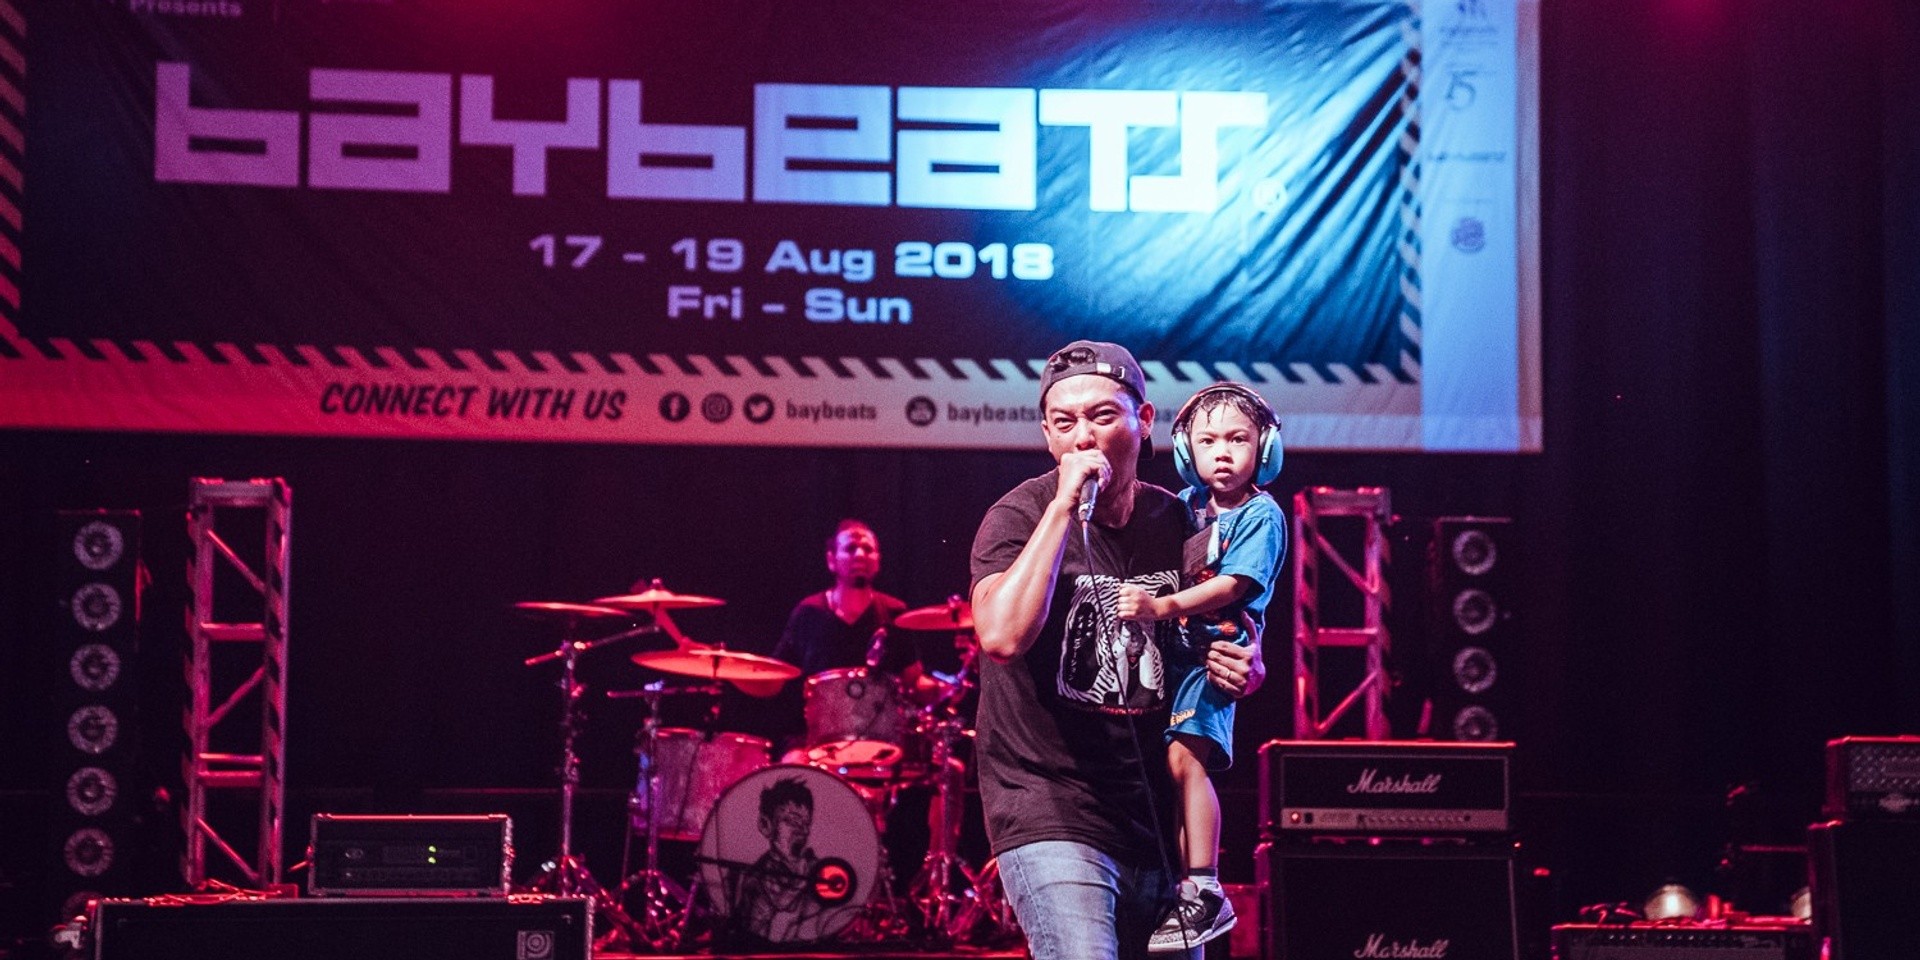 Baybeats 2018 will go down in history as one of the festival's best editions – photo gallery 